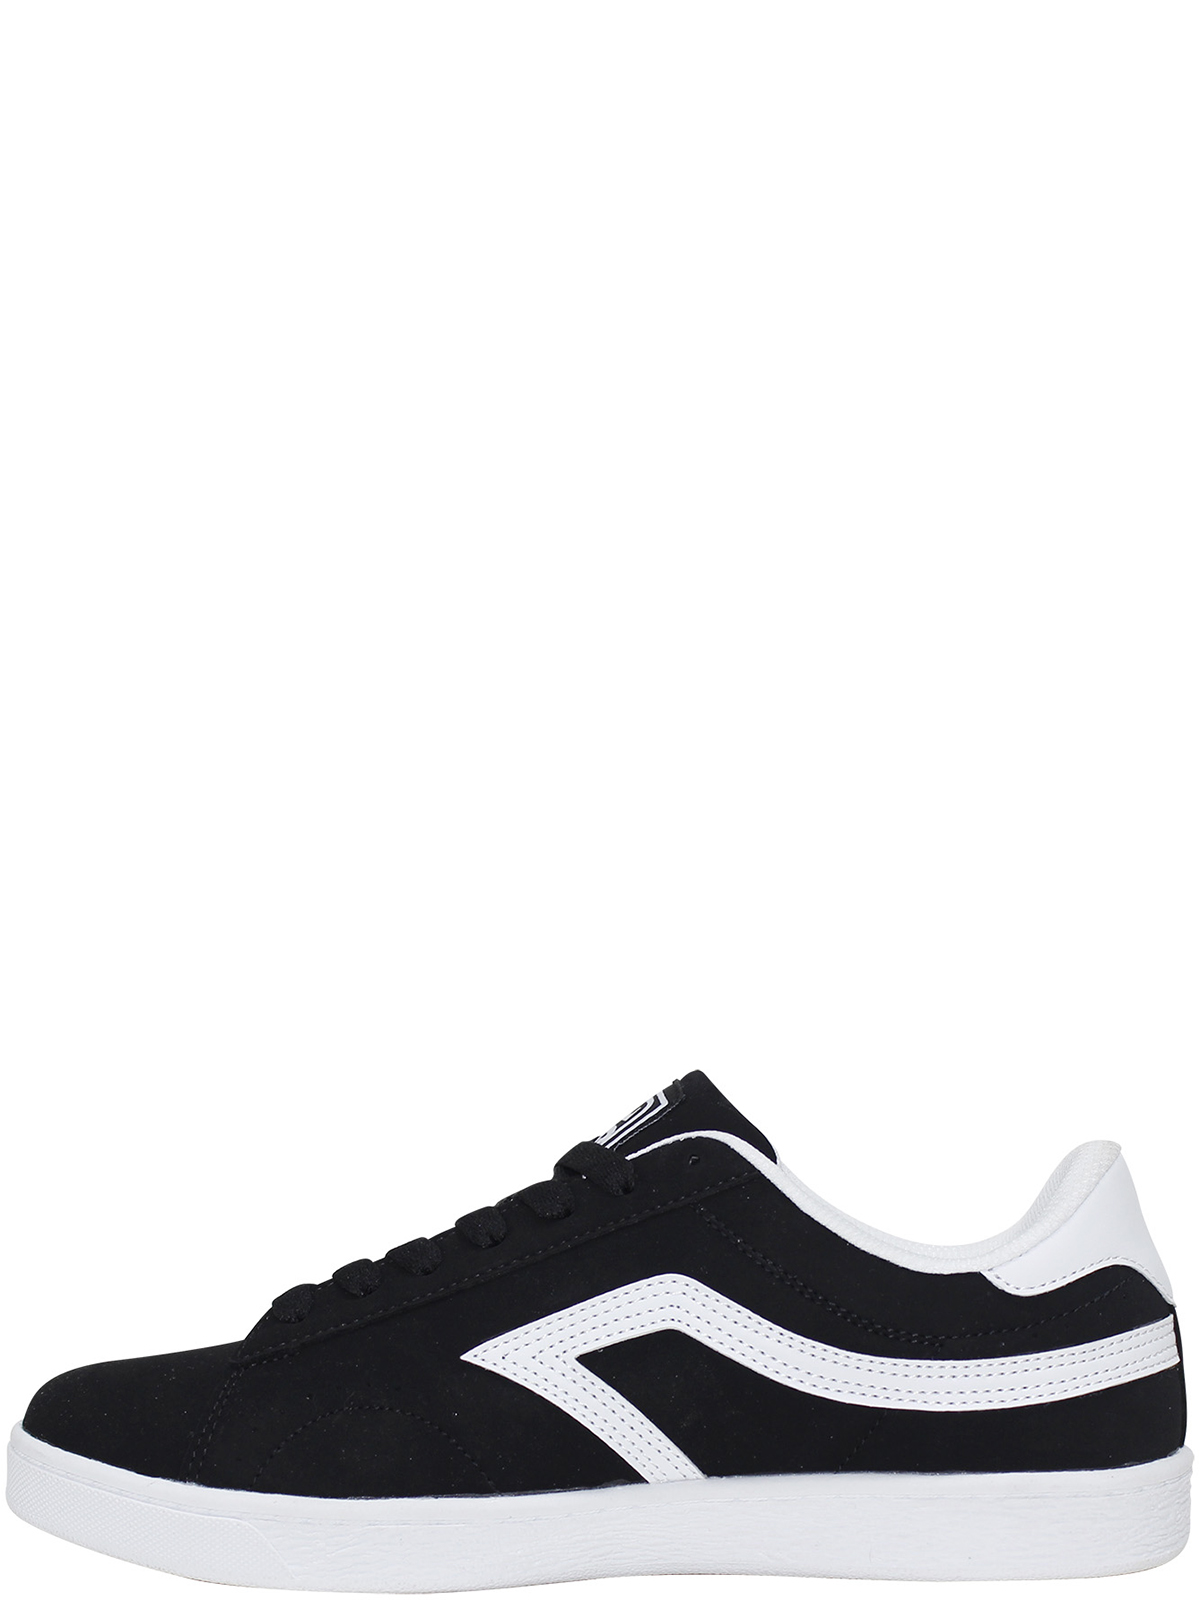 Airspeed Boys' Casual Court Sneaker - image 5 of 6